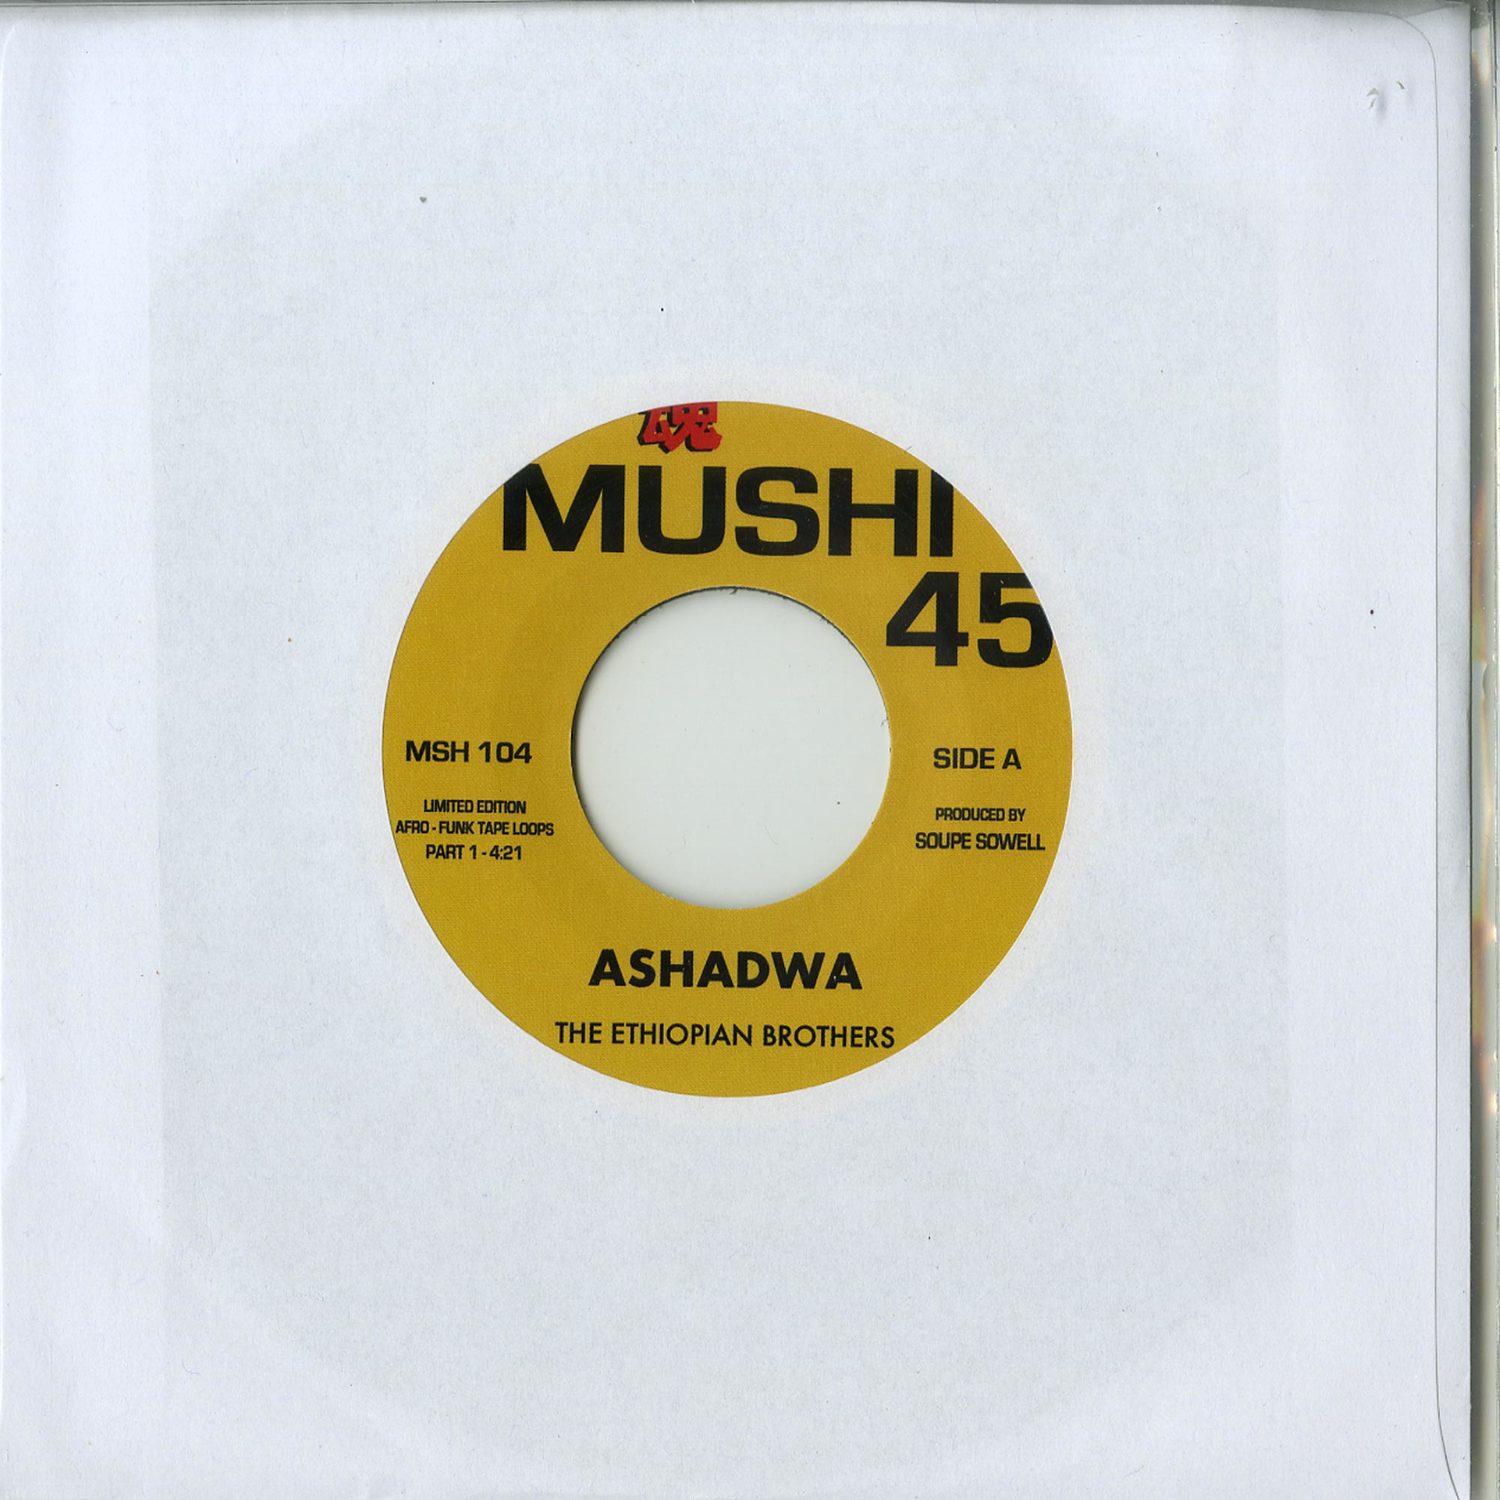 The Ethiopian Brothers - ASHADWA - PART 1 